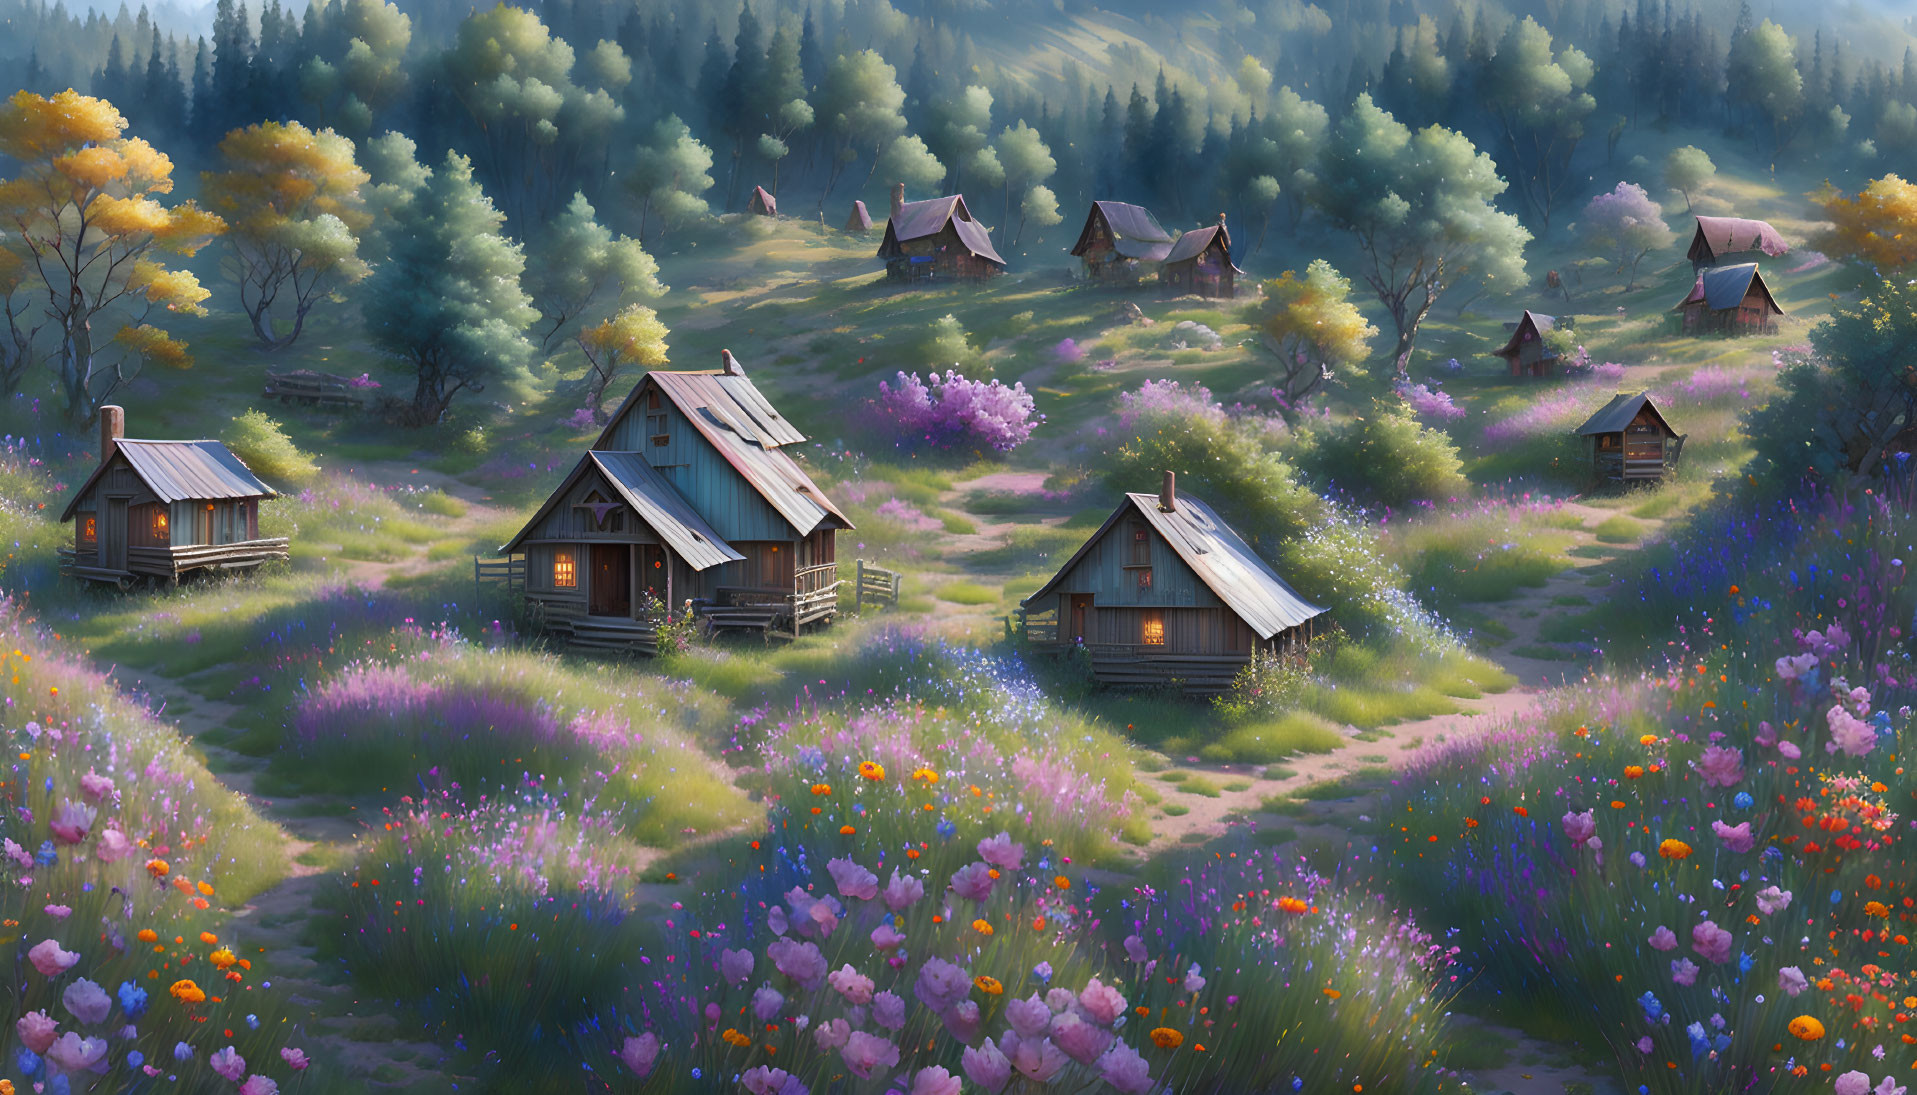 Cozy cabins surrounded by wildflowers in serene woodland setting